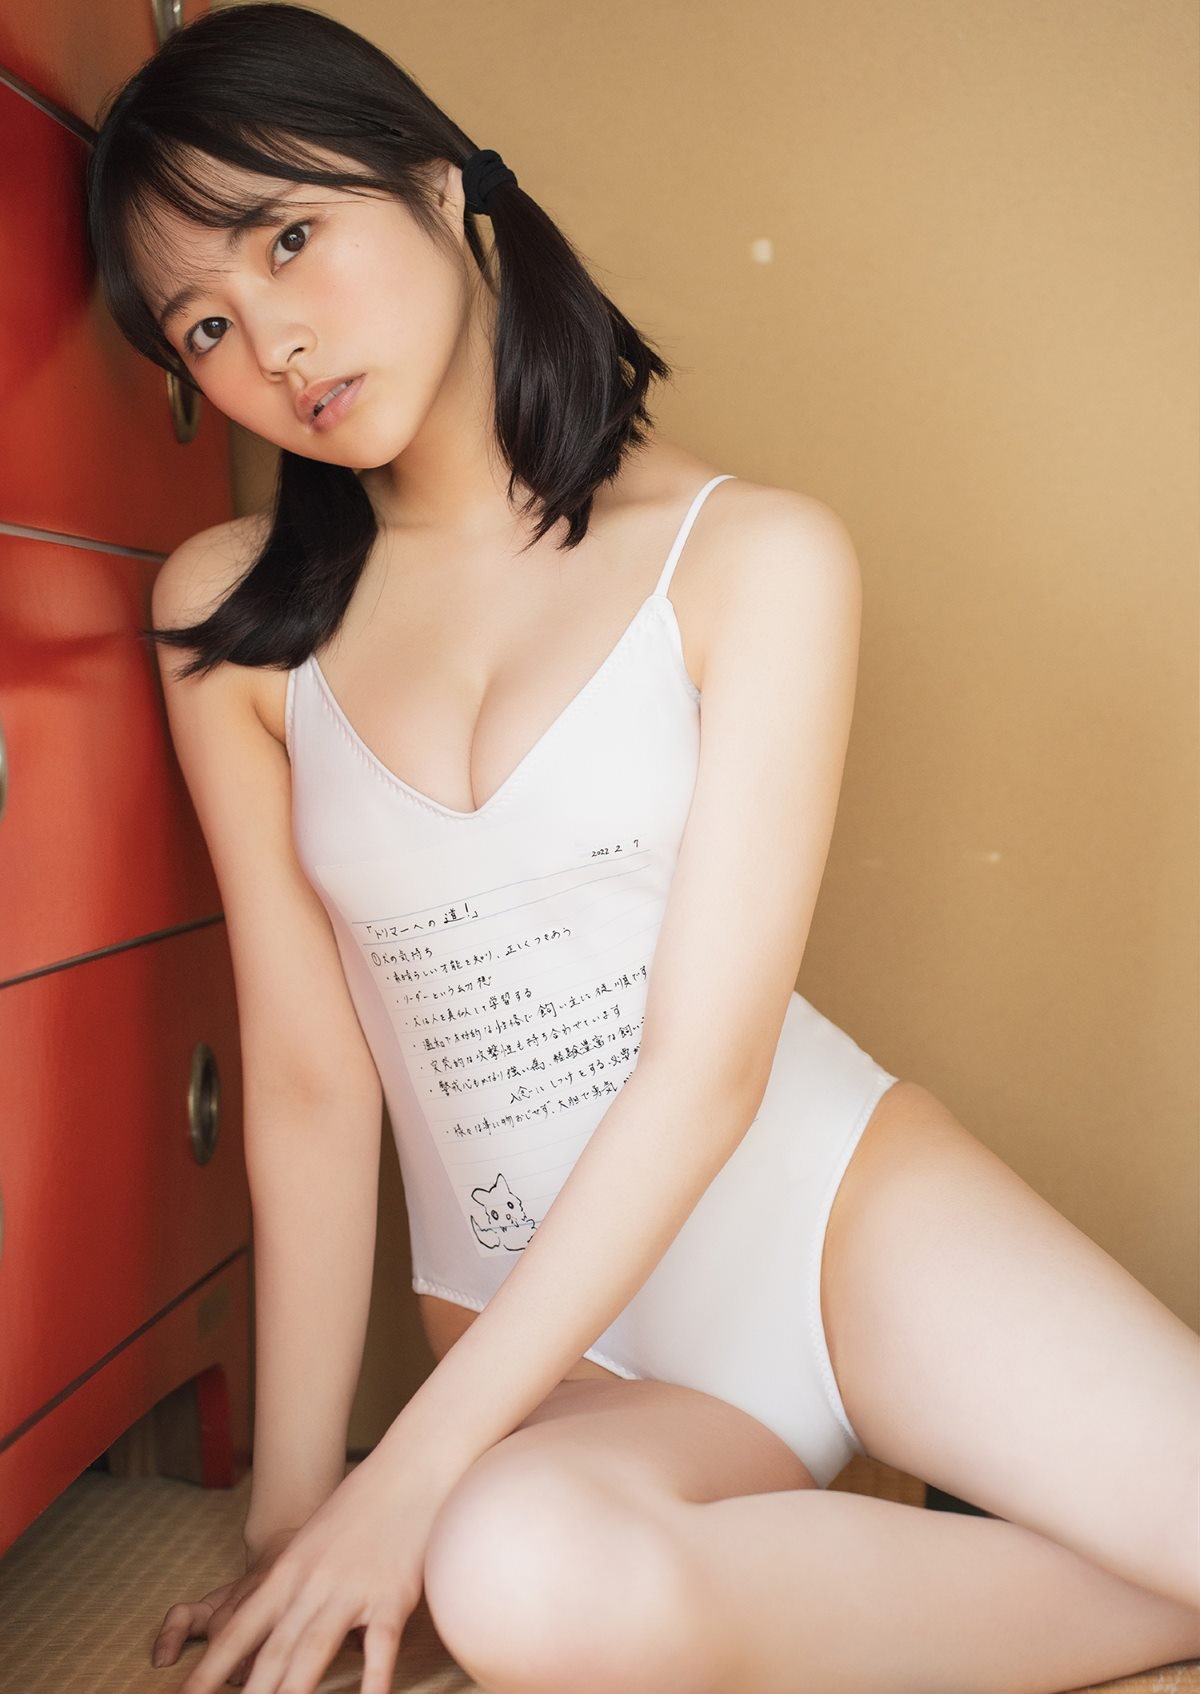 YJ Photobook Usa 宇咲 The only daughter of a public bath is training as a trimmer 銭湯のひとり娘は、トリマー修行中 2022 04 21 0030 0035466147.jpg